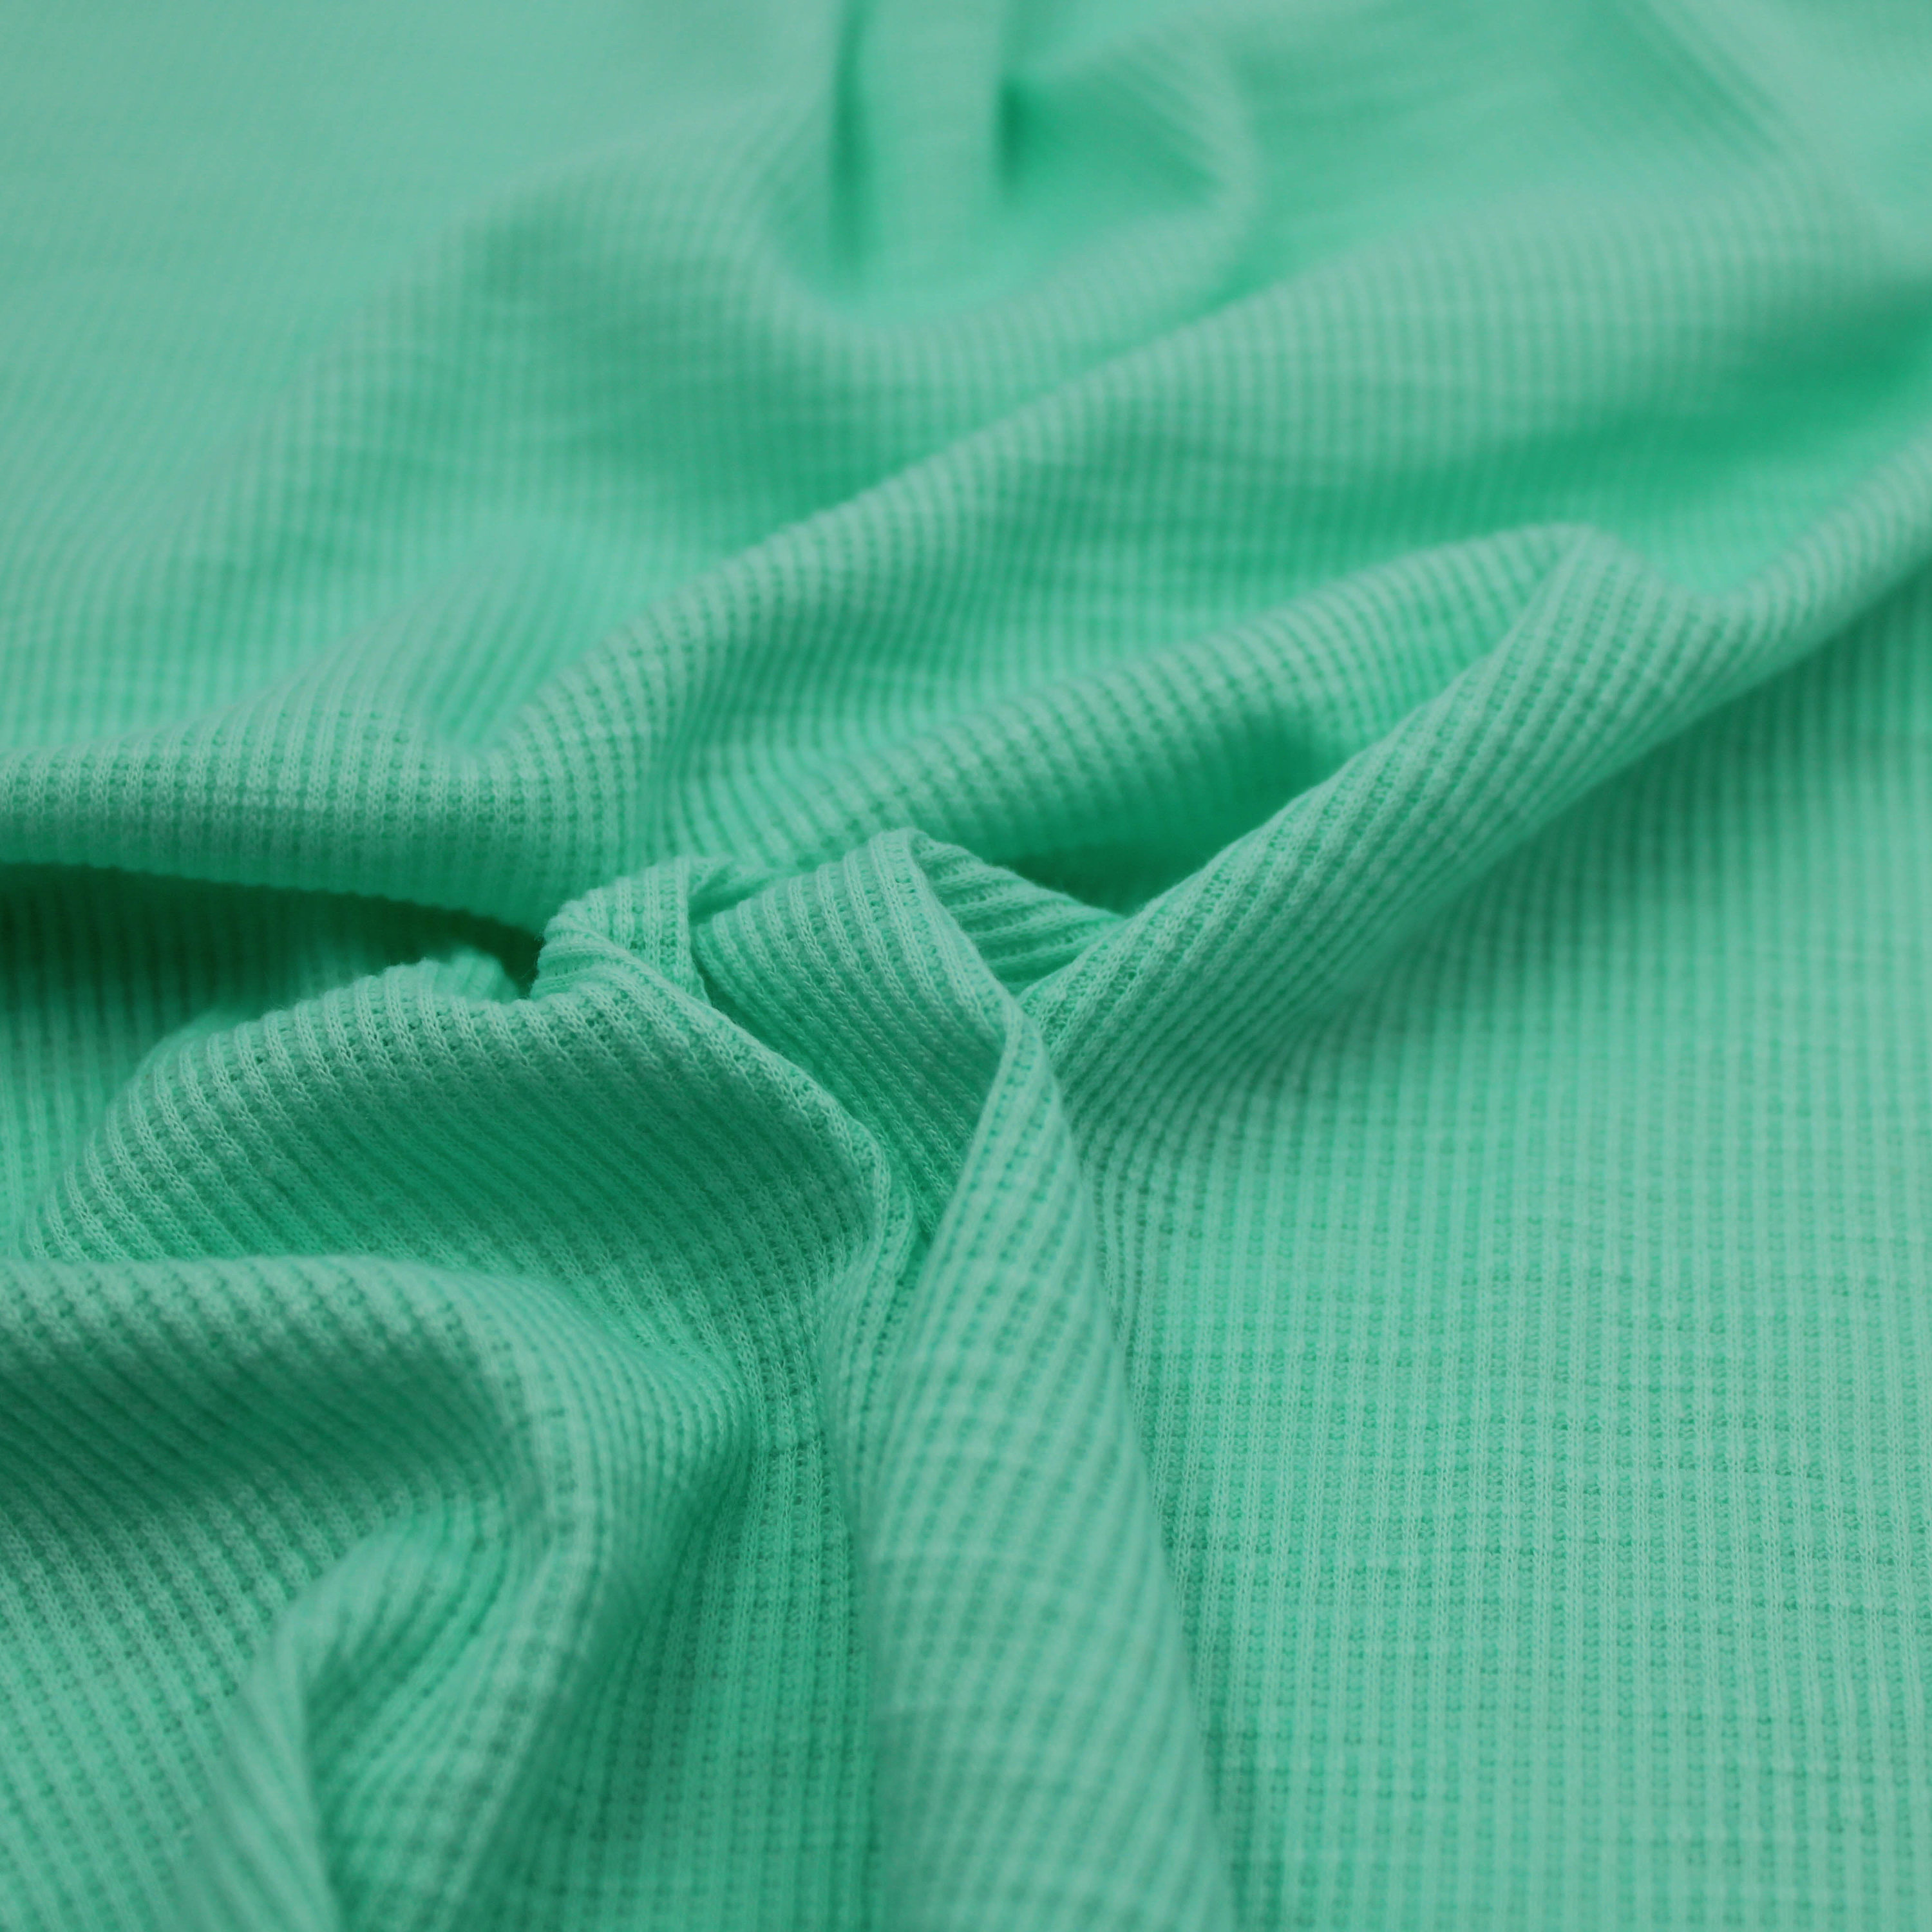 Green Mint Polyester Cotton Spandex 2x1 Rib Knit Fabric by the